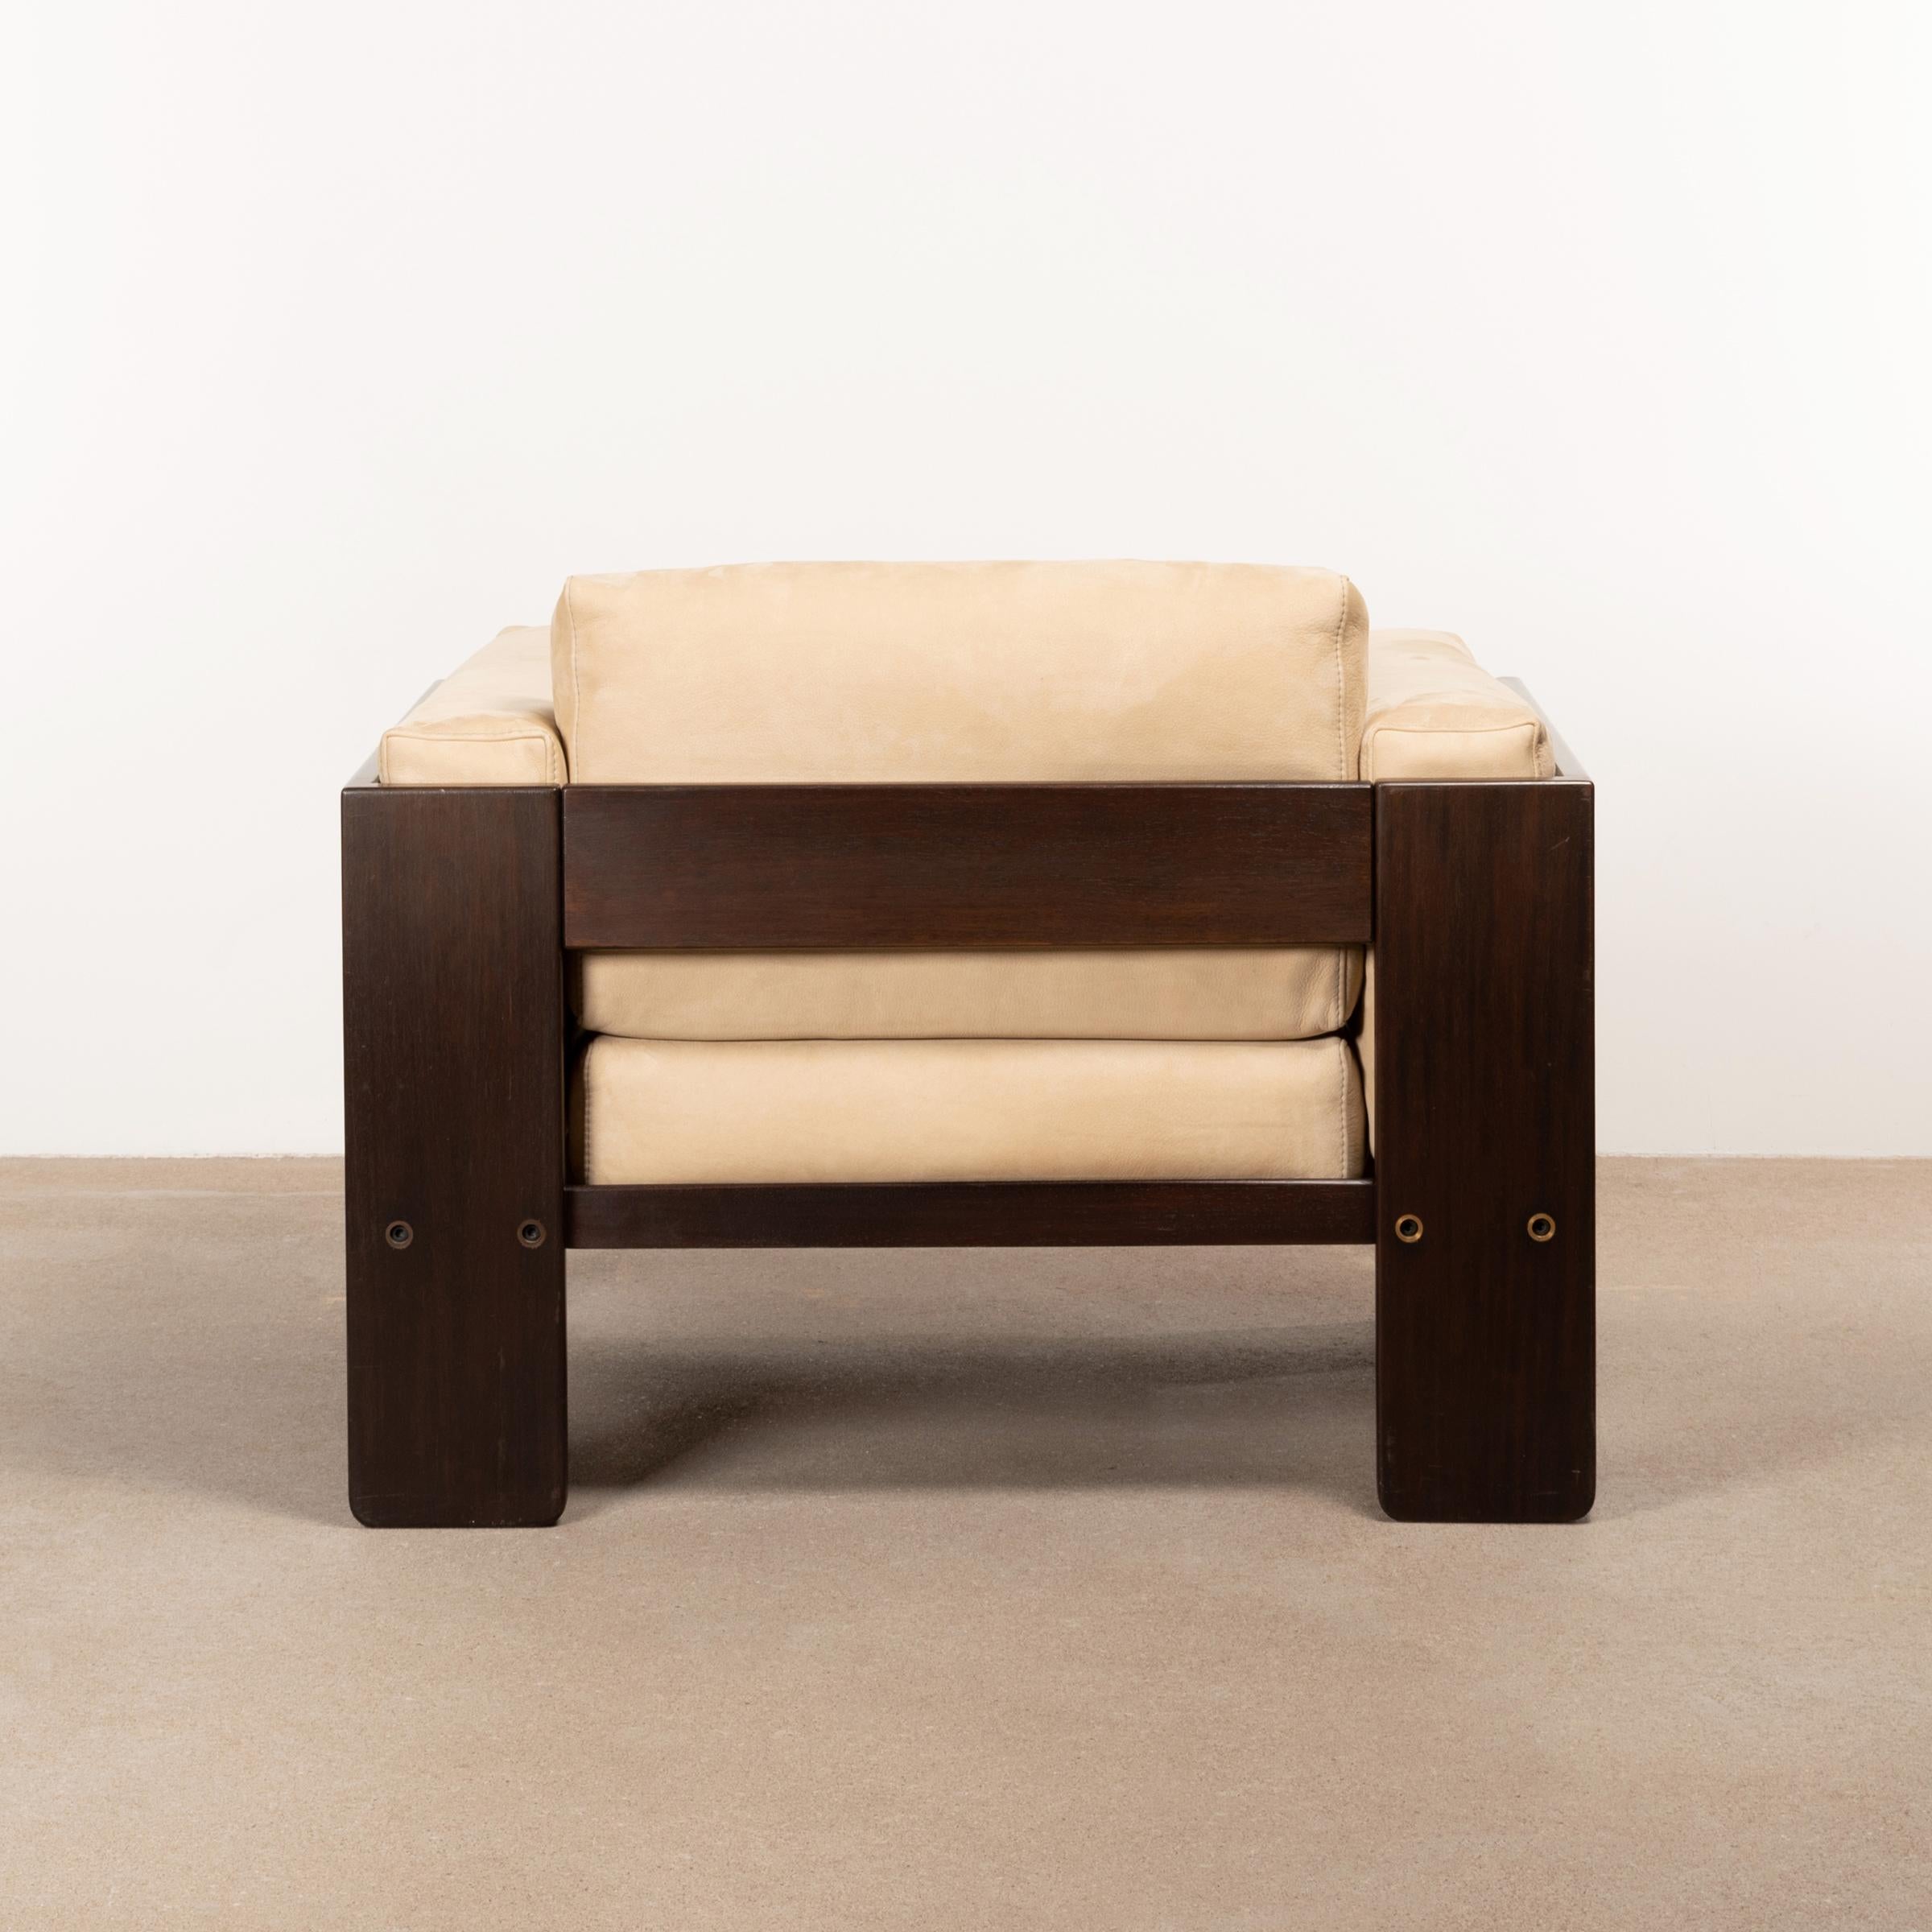 Tobia Scarpa Bastiano Lounge Chairs in Walnut and Beige Suede Leather for Knoll 1